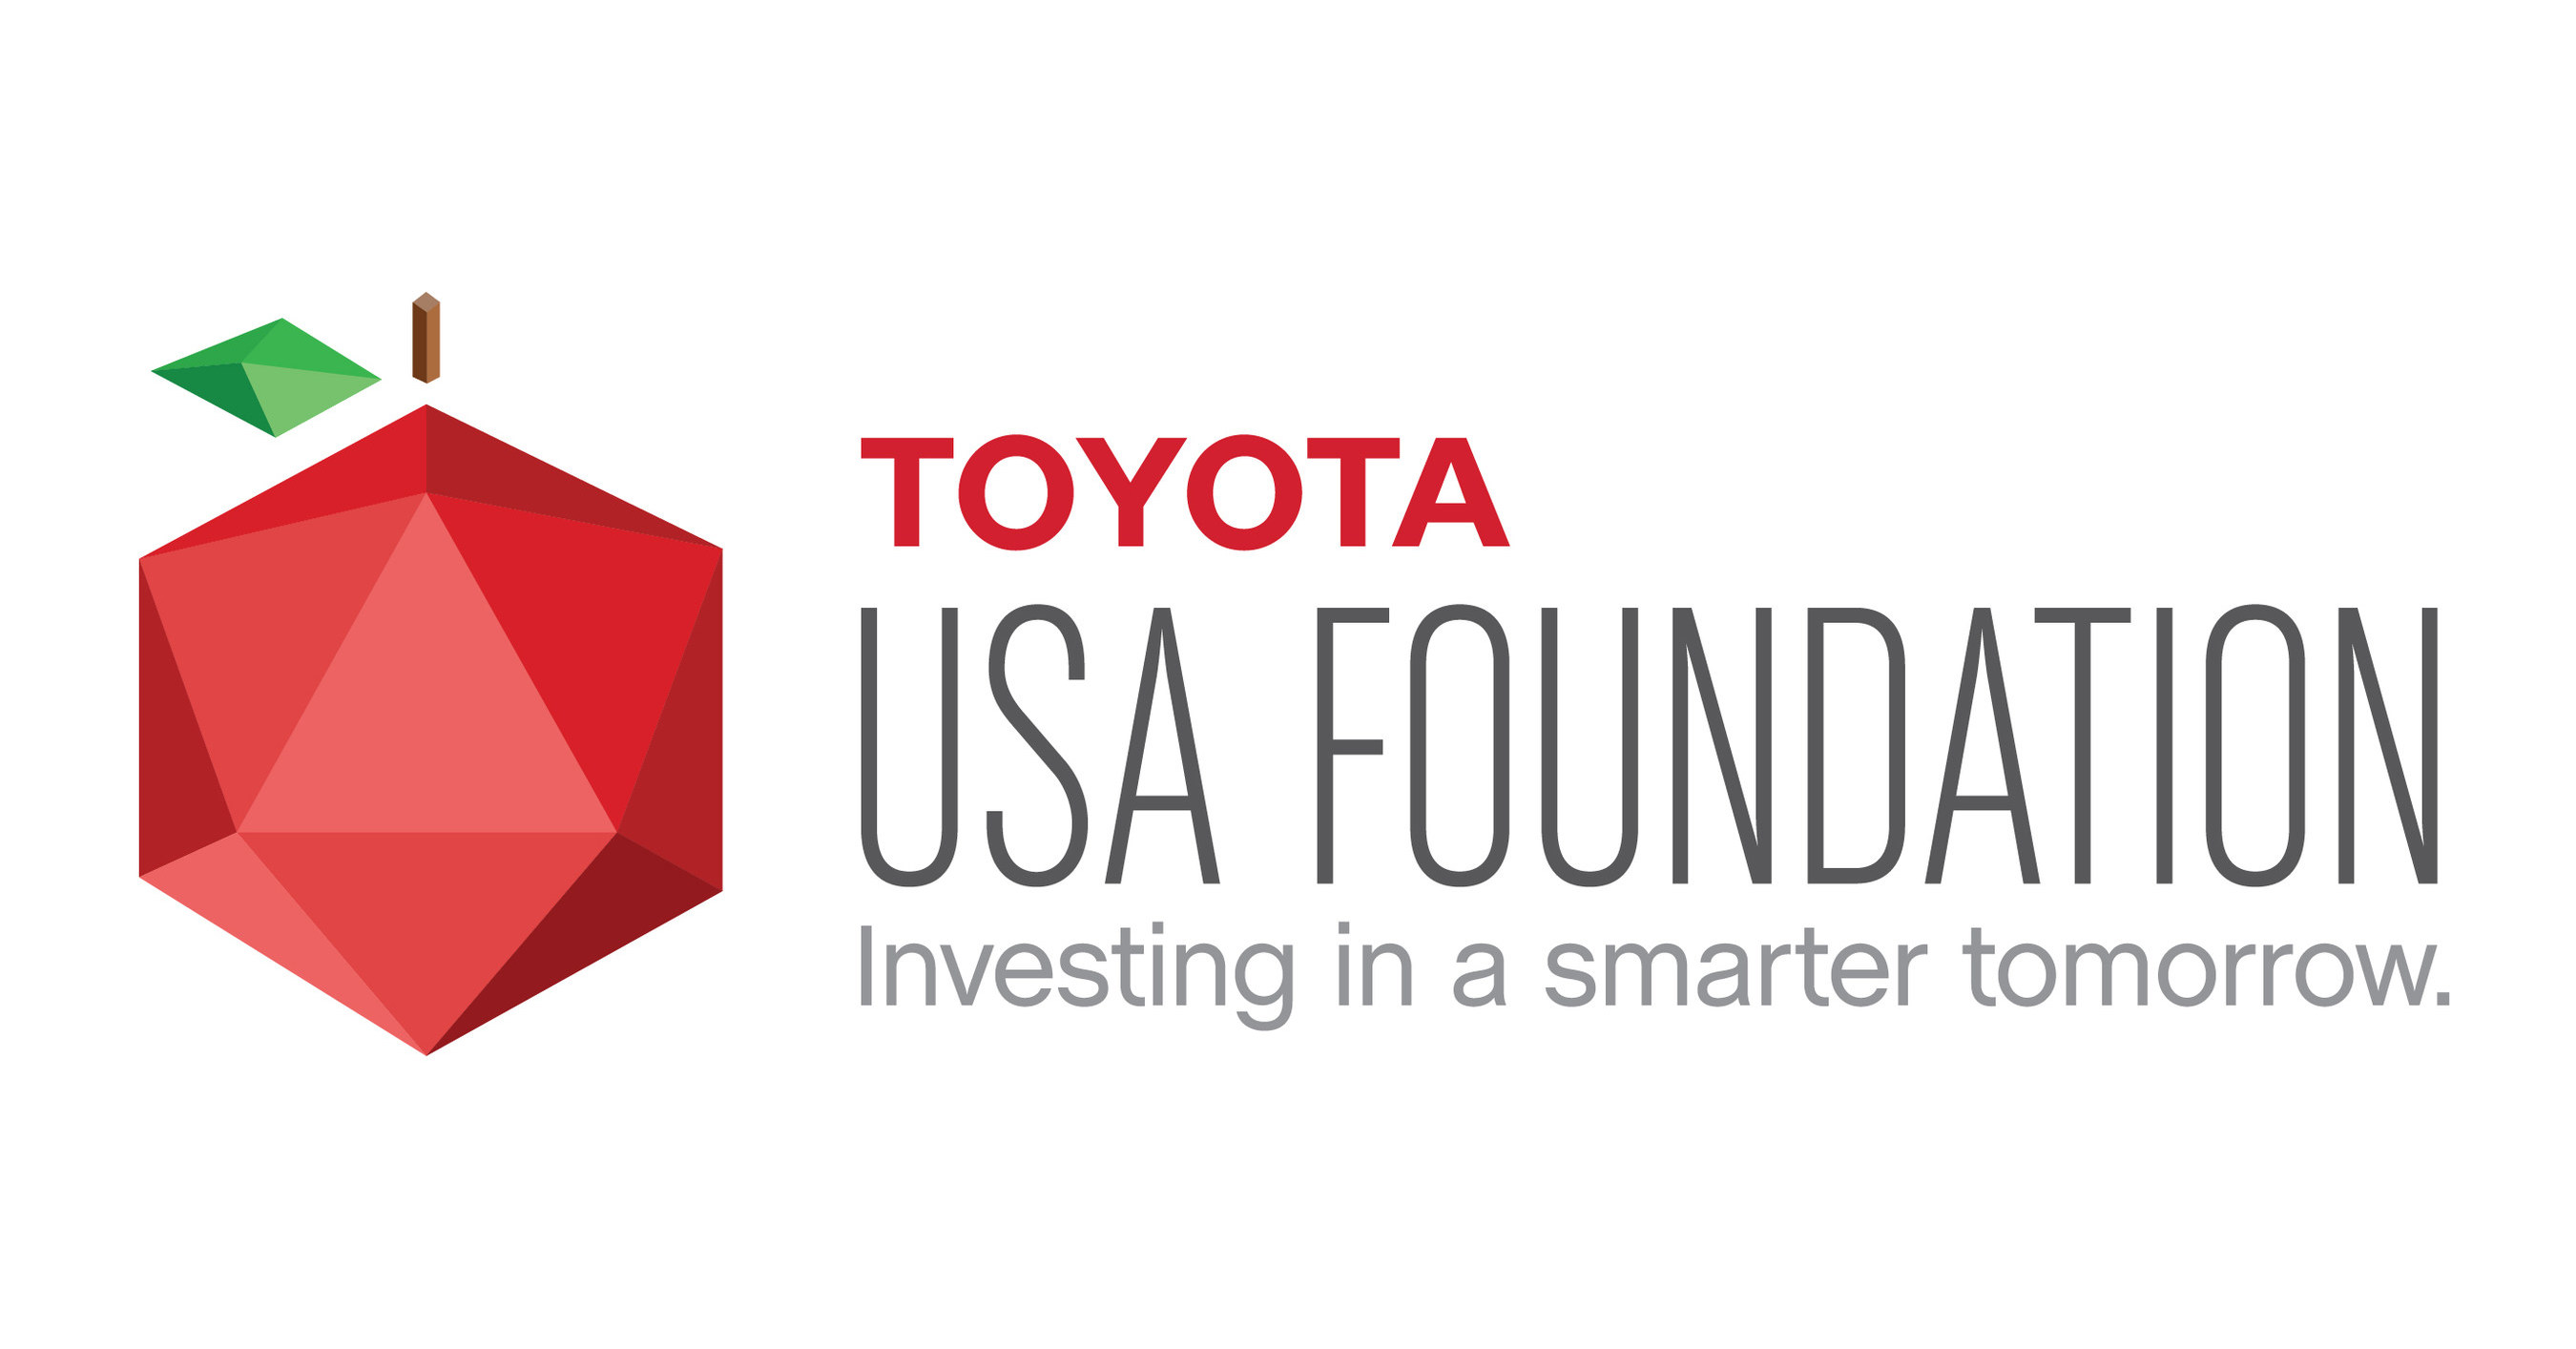 Southwest ISD Receives 1.7 Million Grant from Toyota USA Foundation